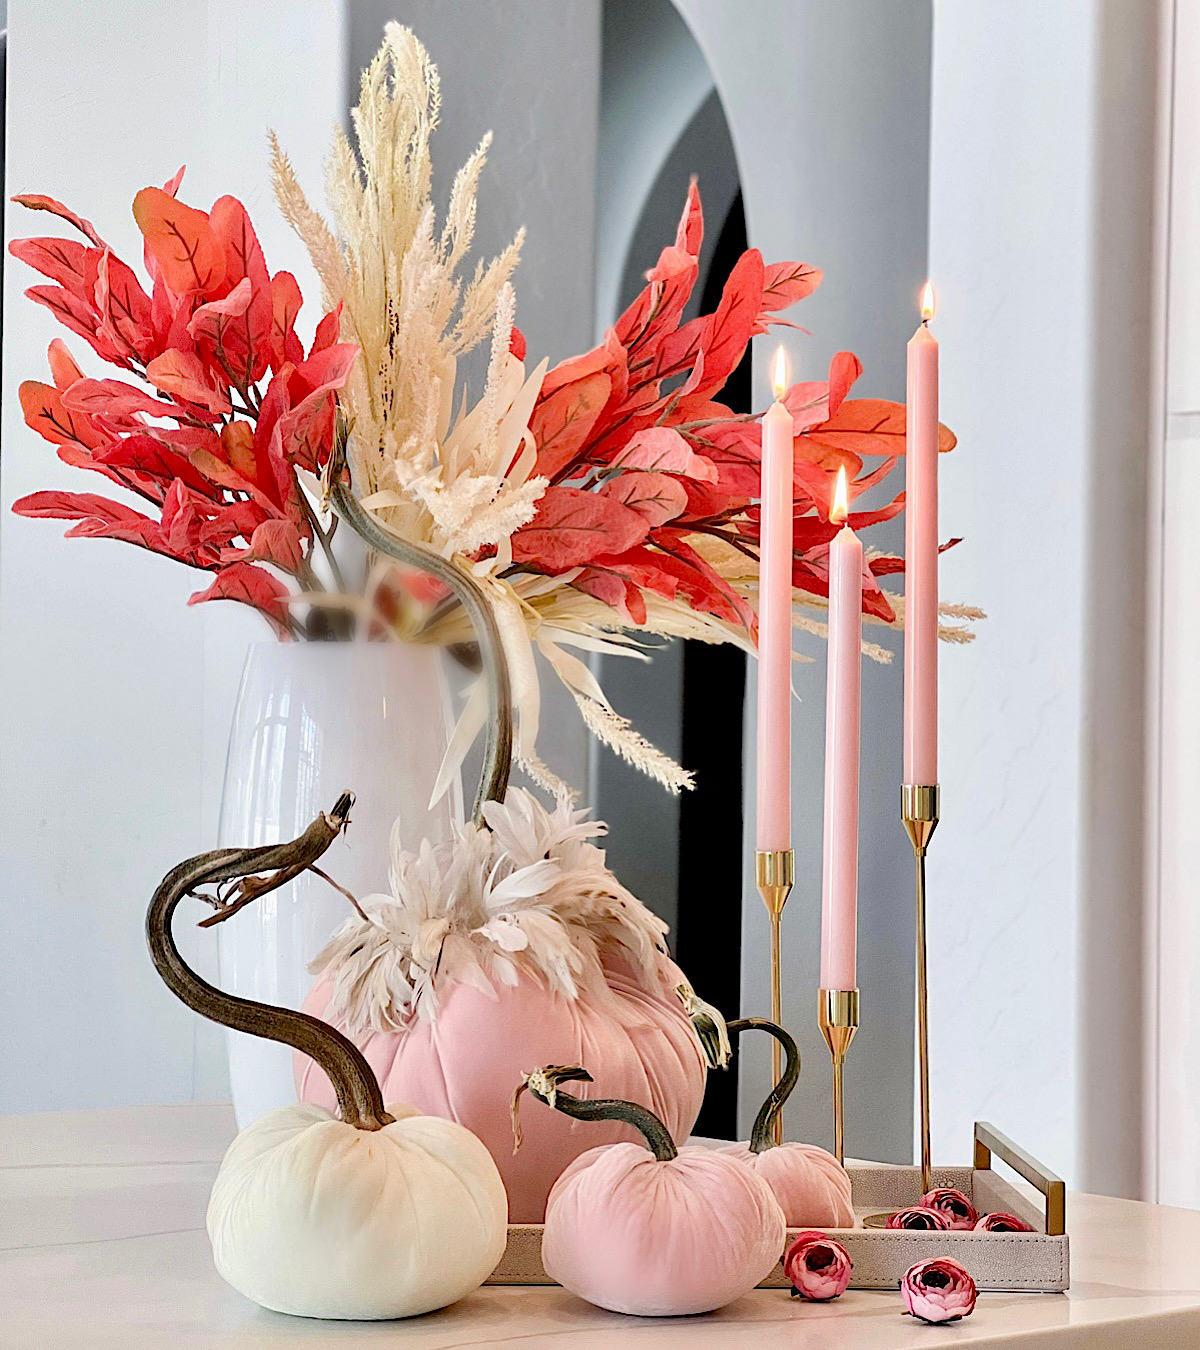 How to Decorate Your Home in Pink for a Romantic Fall Look